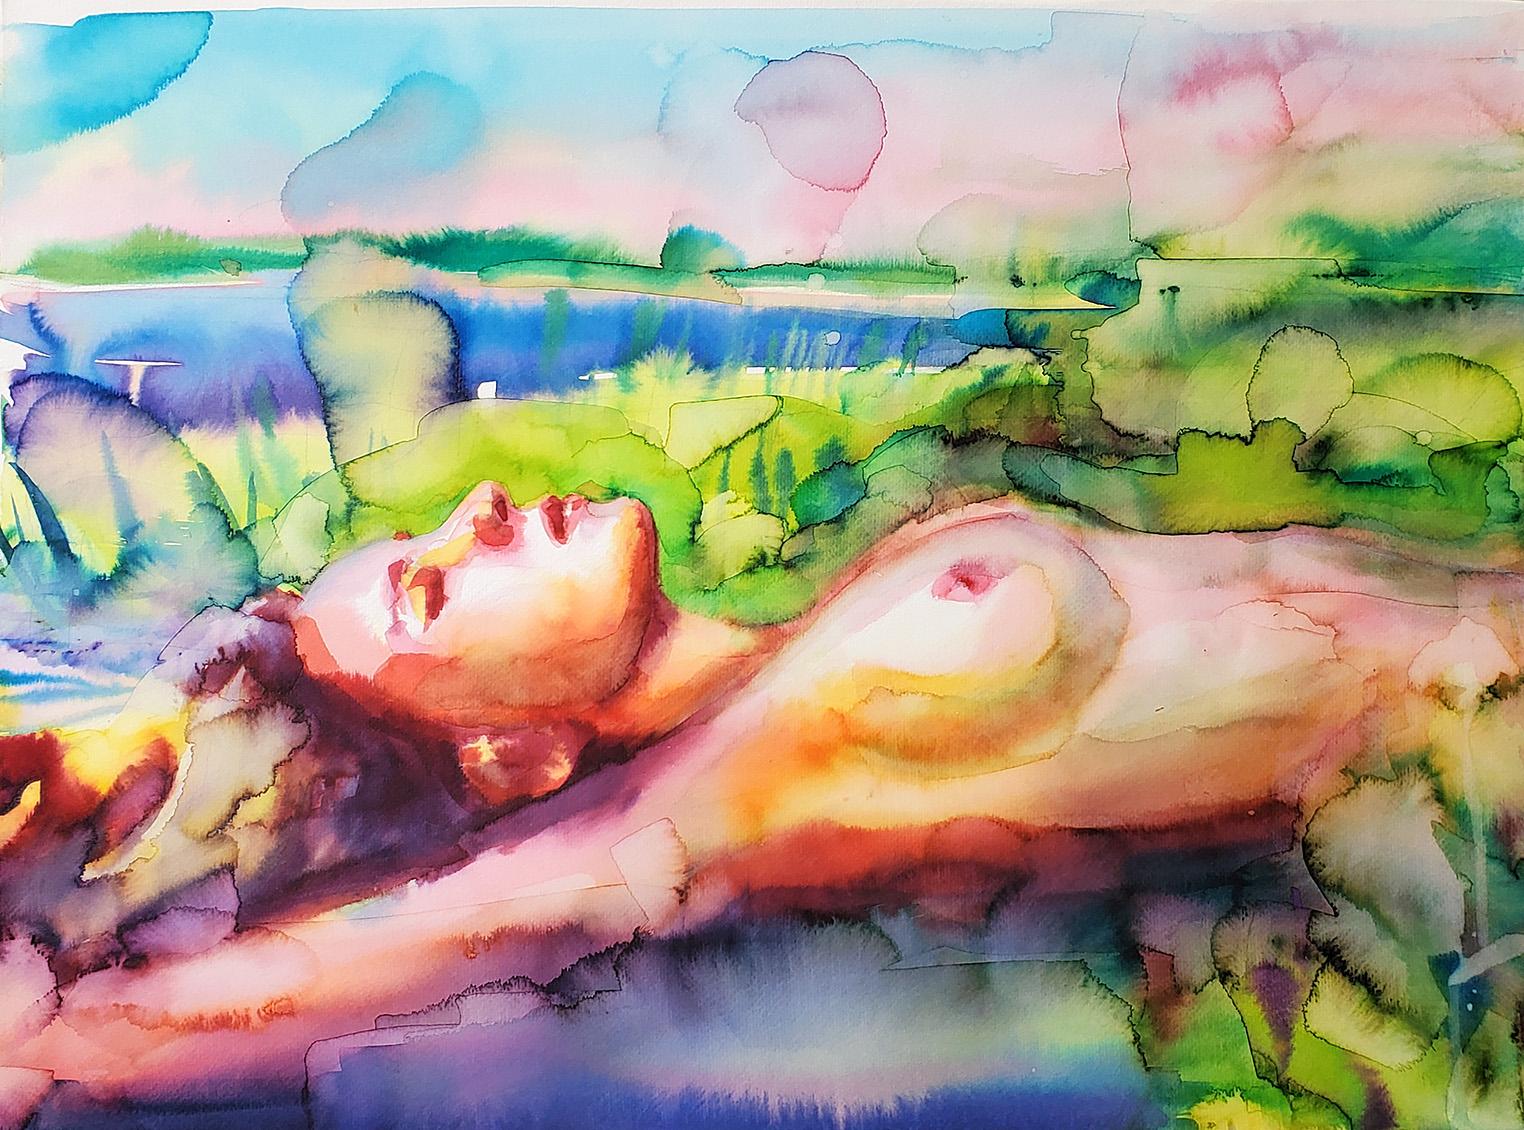 „Dreaming by the River“ Figurative Zeichnung, Akt, lebhaft, Aquarell, gerahmt